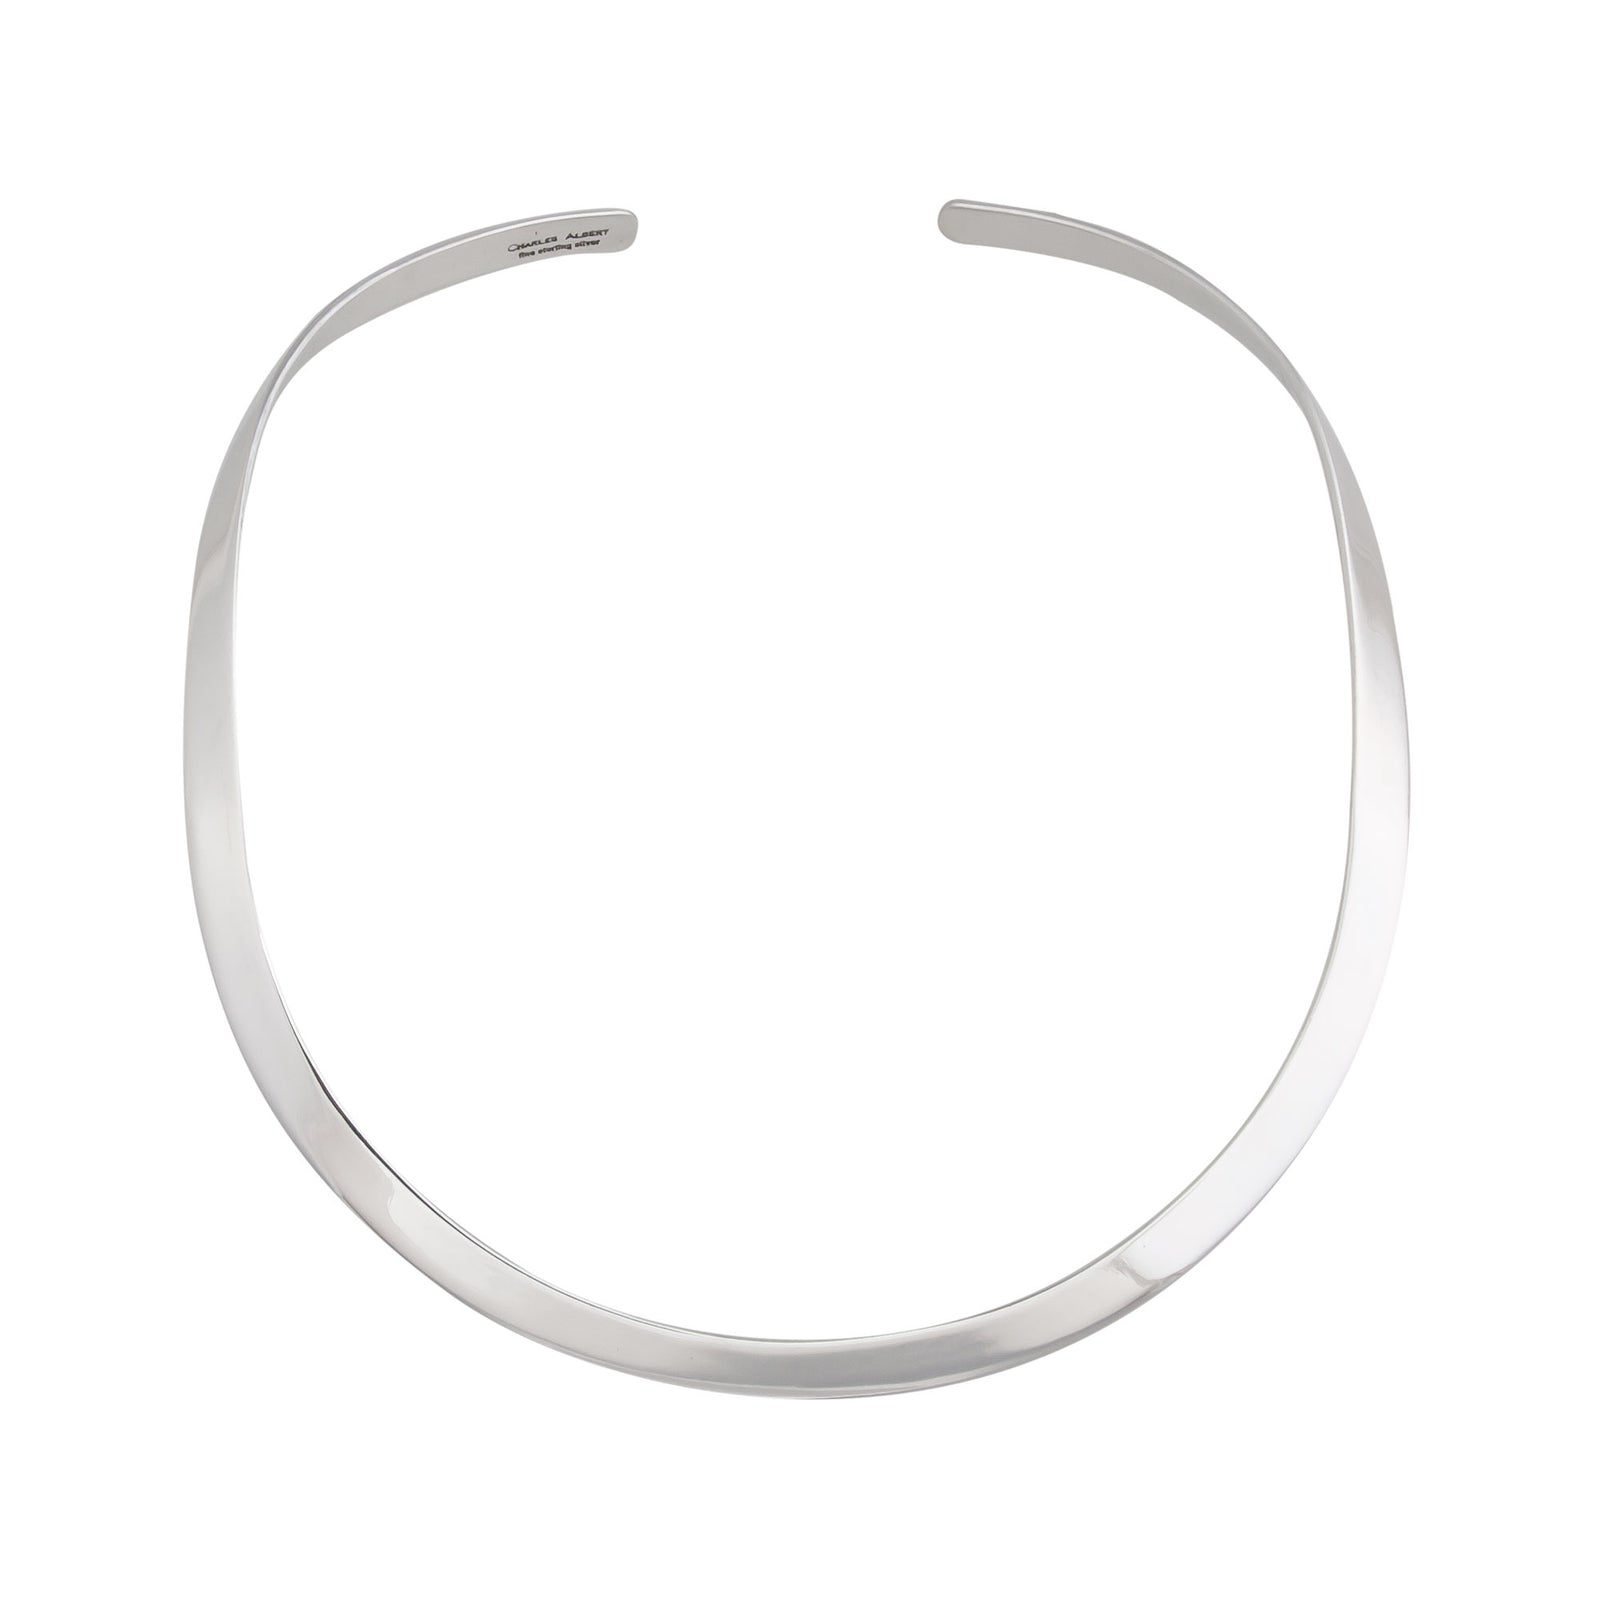 Sterling Silver Open Round Neckwire | Charles Albert Jewelry